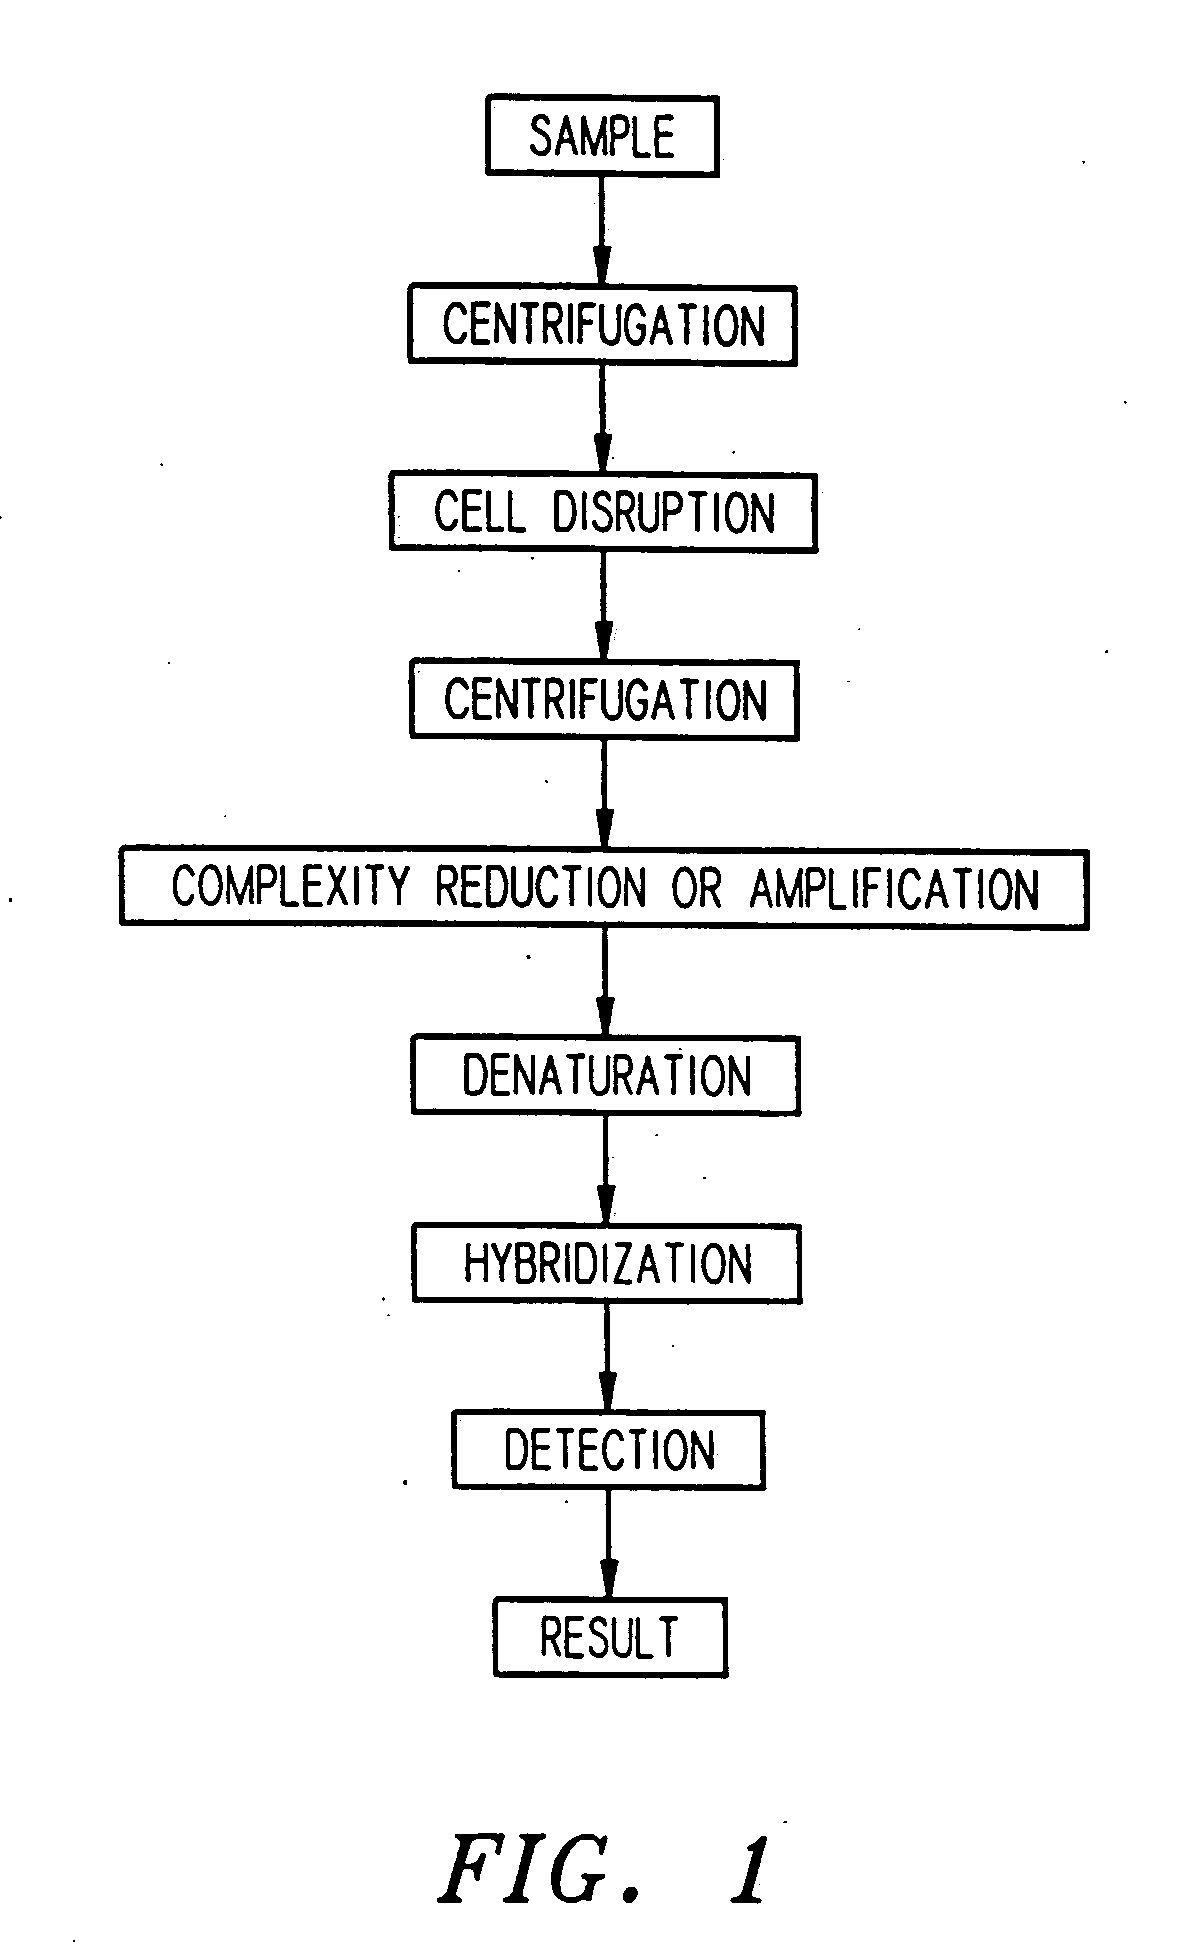 Apparatus for active programmable matrix devices